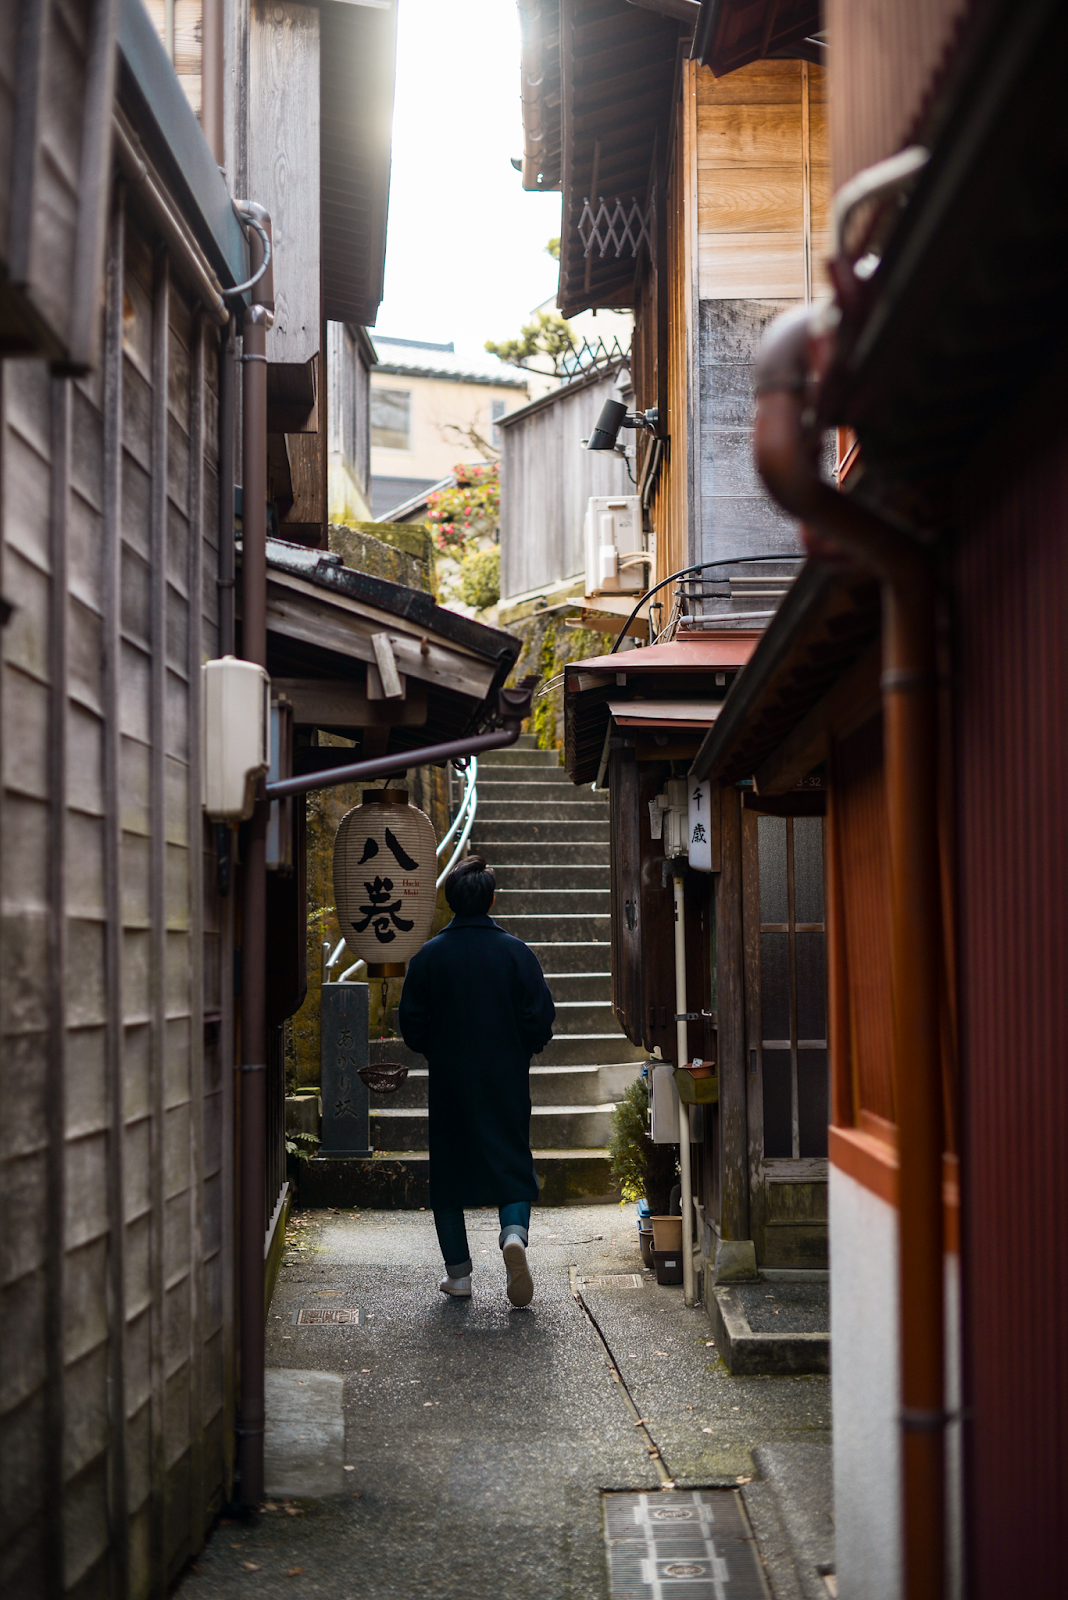 Streets of Kanazawa, Kanazawa trip from Tokyo, must-visit cities in Japan, Nishi Chaya District, photogenic and charming towns in Japan - FOREVERVANNY